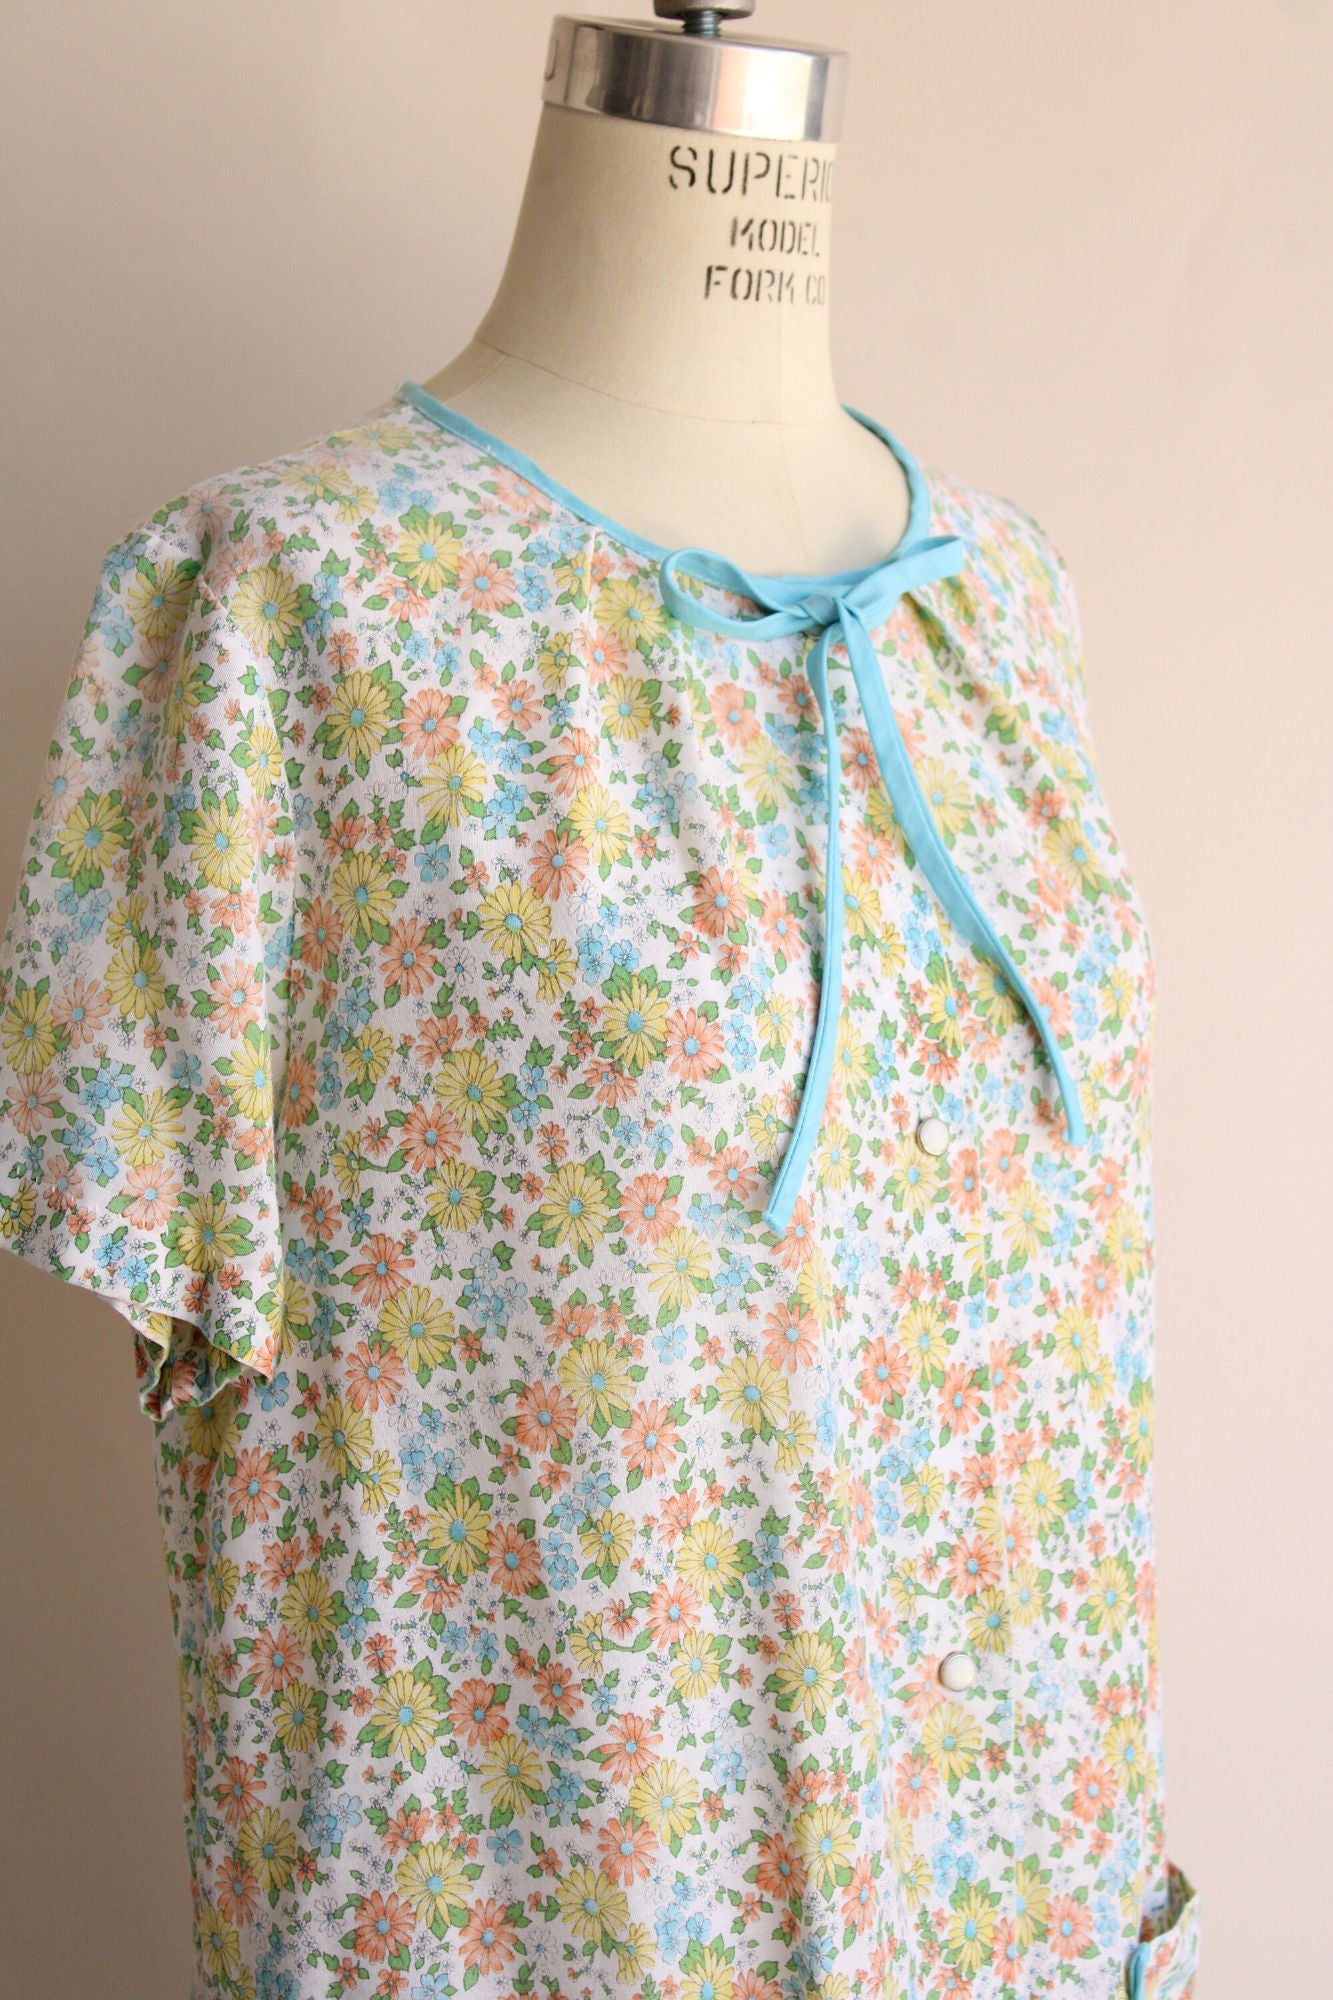 Vintage 1960s 1970s Floral Print Housecoat with Pockets